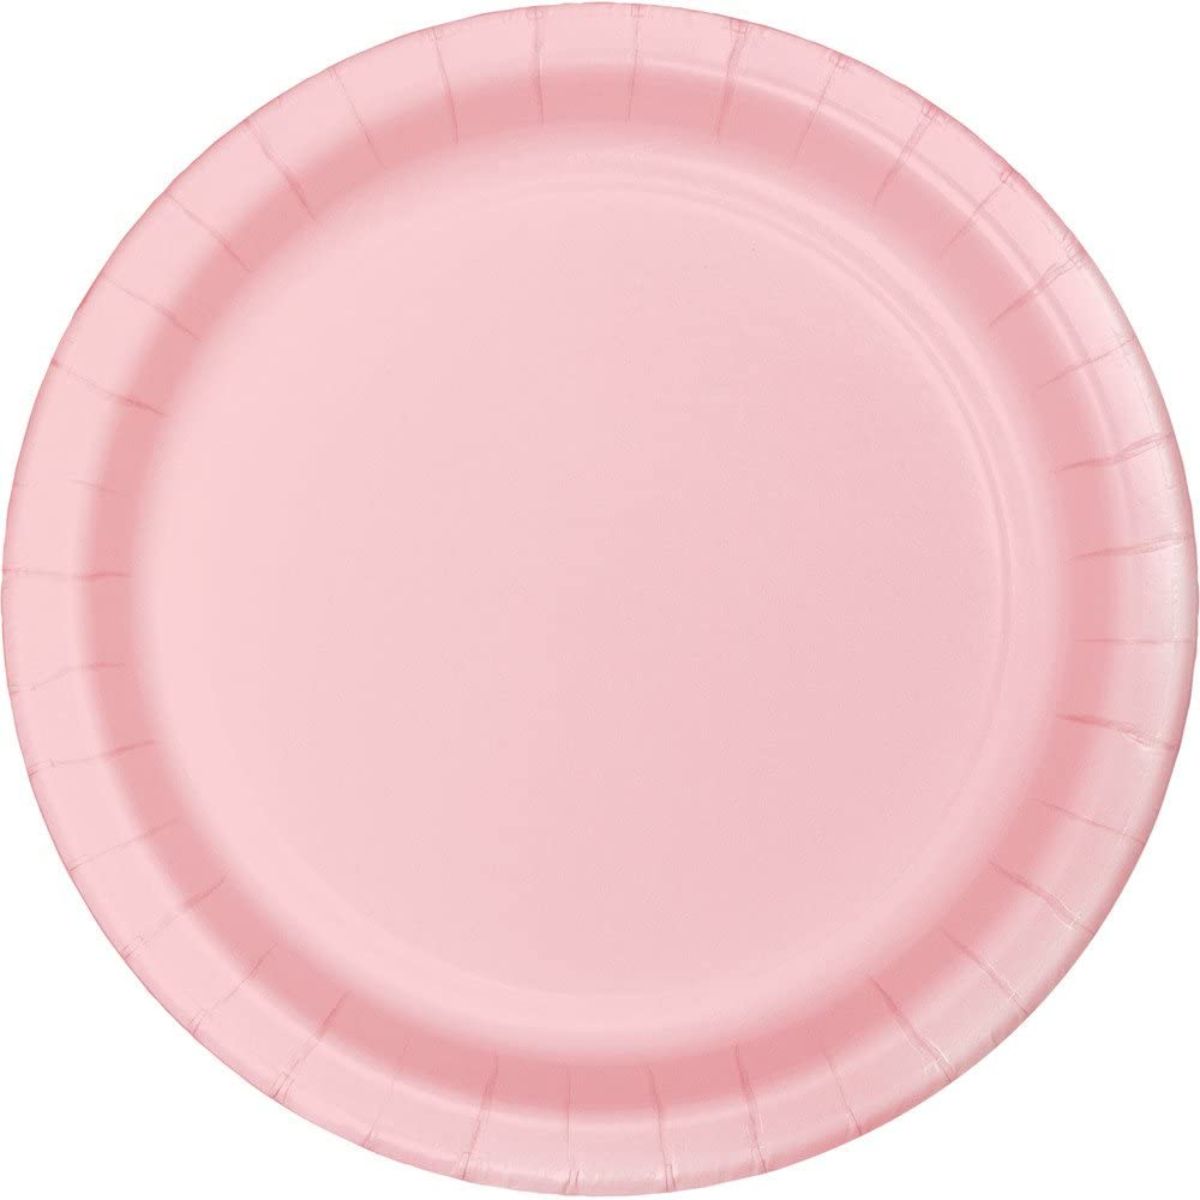 New Purple Lunch Paper Plates 8.5